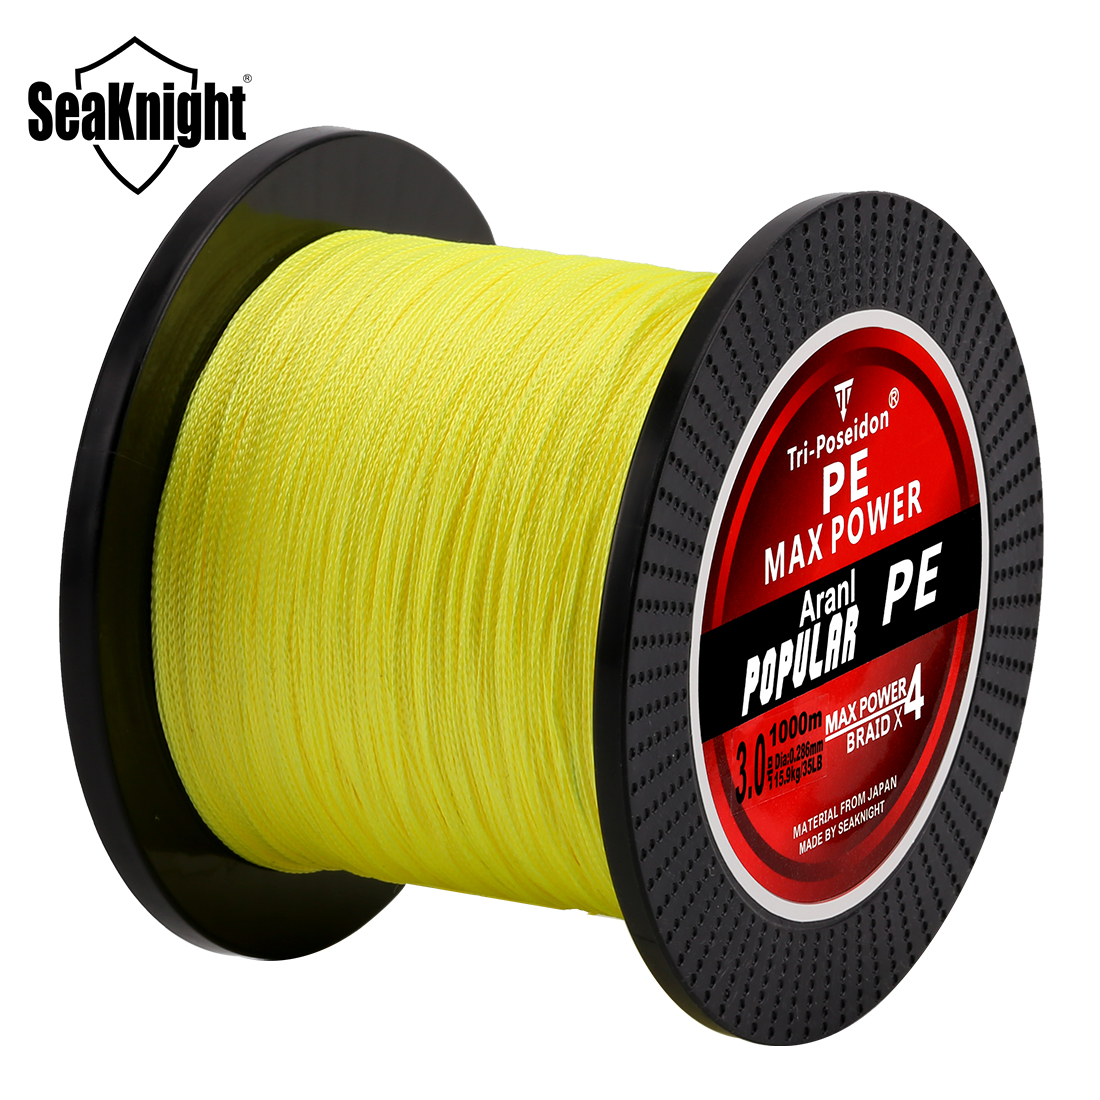 SeaKnight TriPoseidon 4 Strands Braided Fishing Line 1000M Saltwater Fishing  Line Long Casting Multifilament PE Wire Floating Sea Fishing Lines 8 Colors  8-80LB